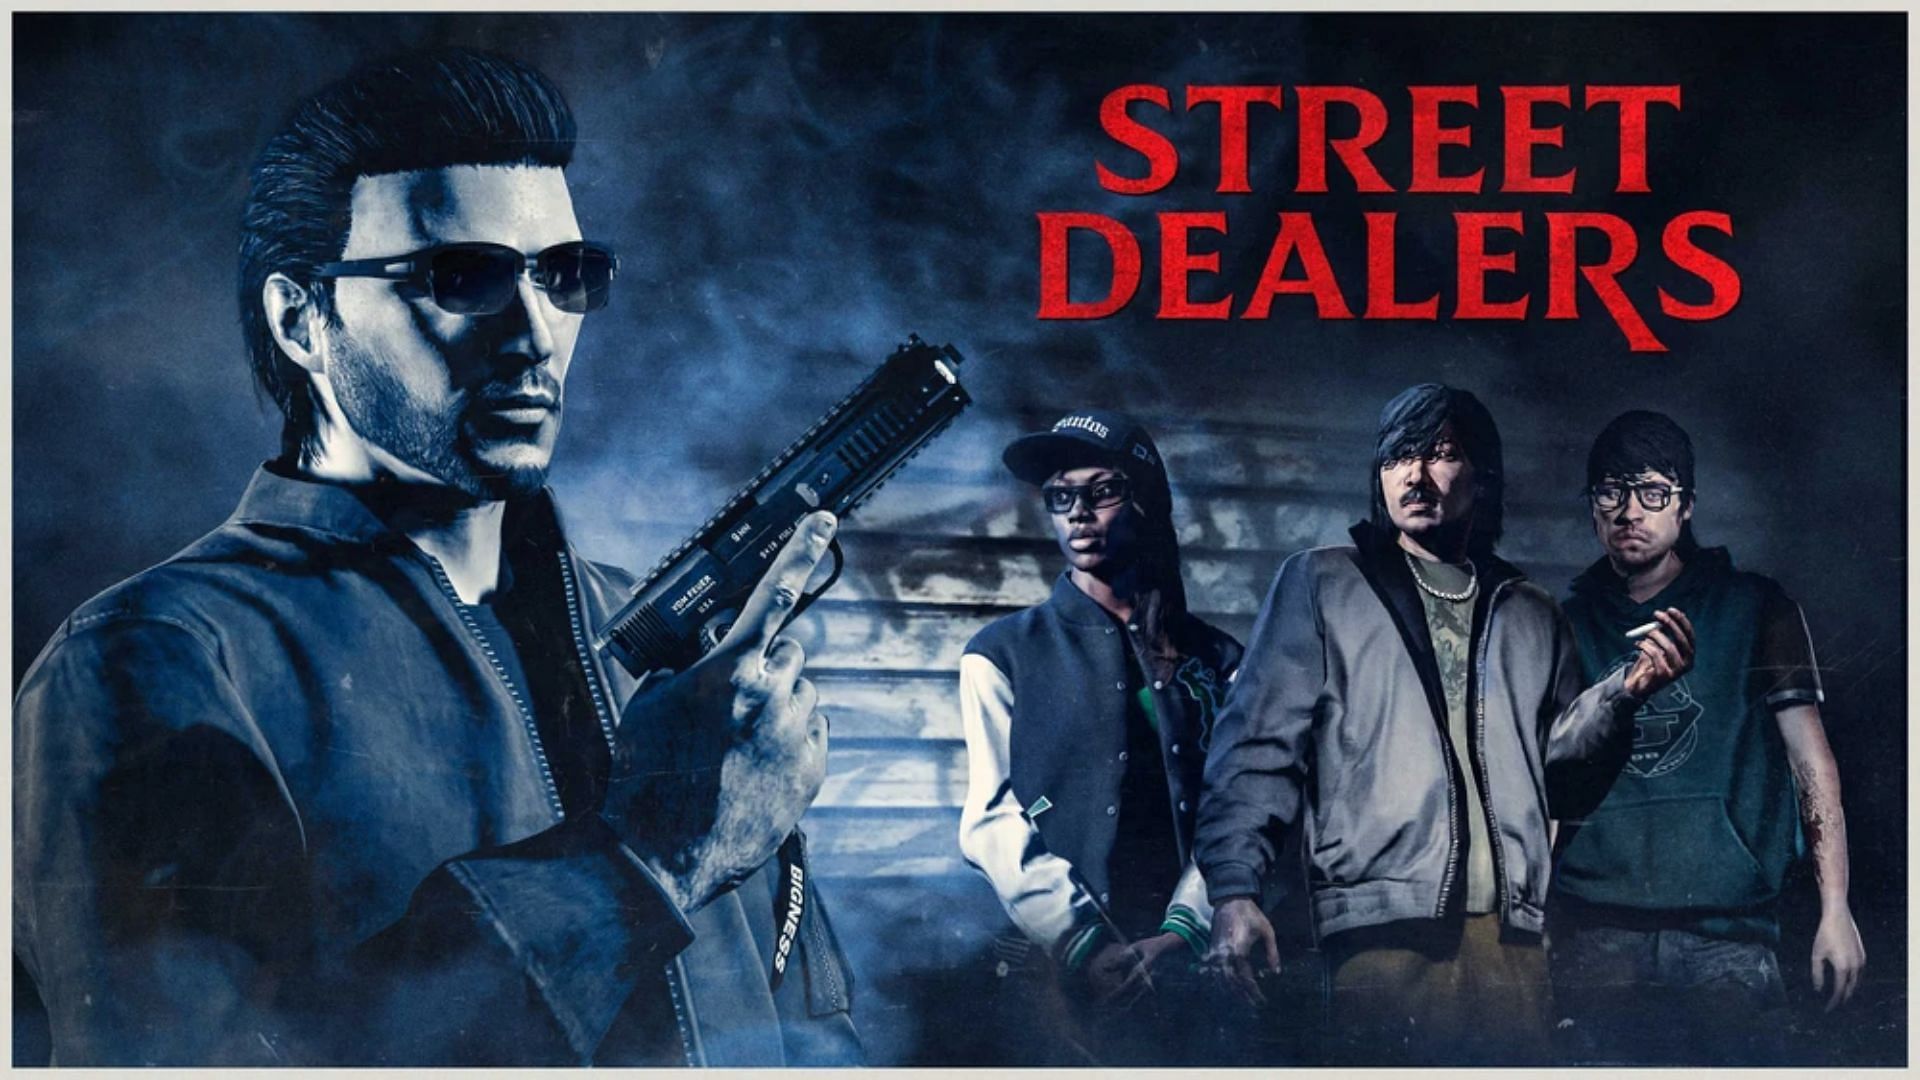 The official poster for the Street Dealers even in Grand Theft Auto 5 Online (Image via Rockstar Games)